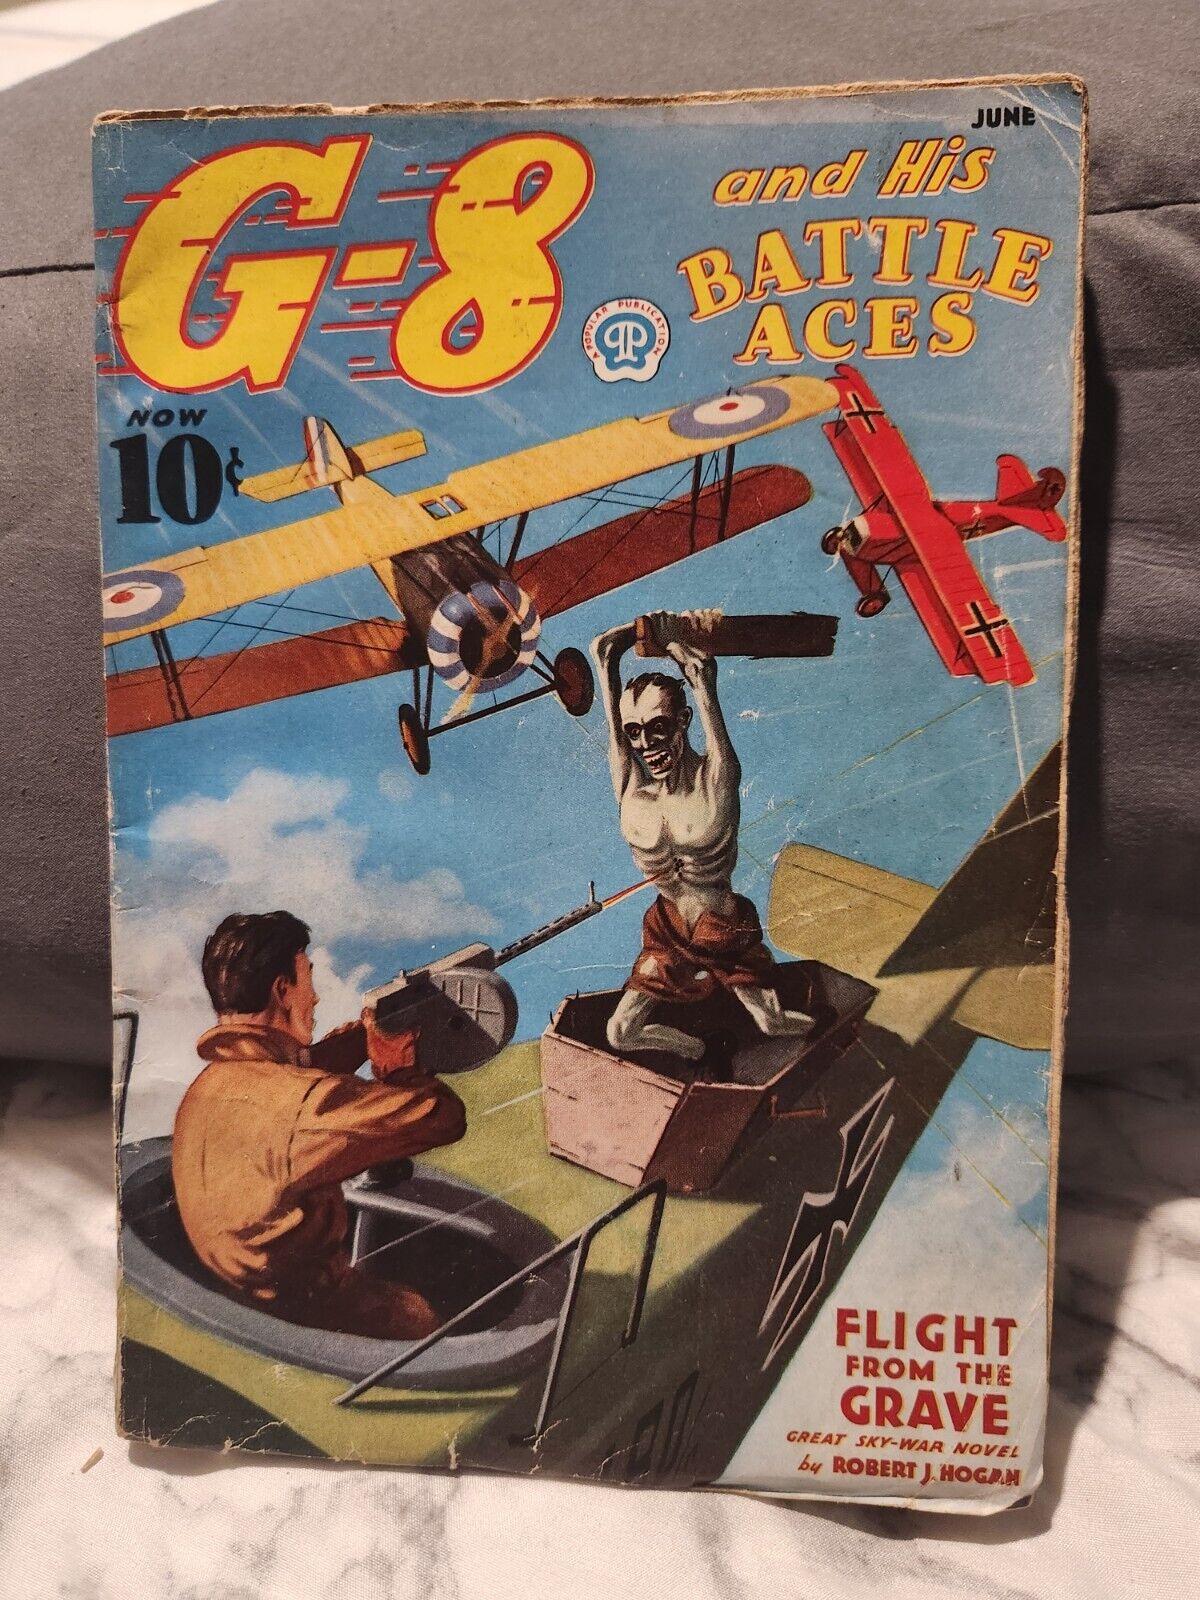 G-8 and His Battle Aces Pulp June 1937-Zombie cover Malcolm Edwards Collection 